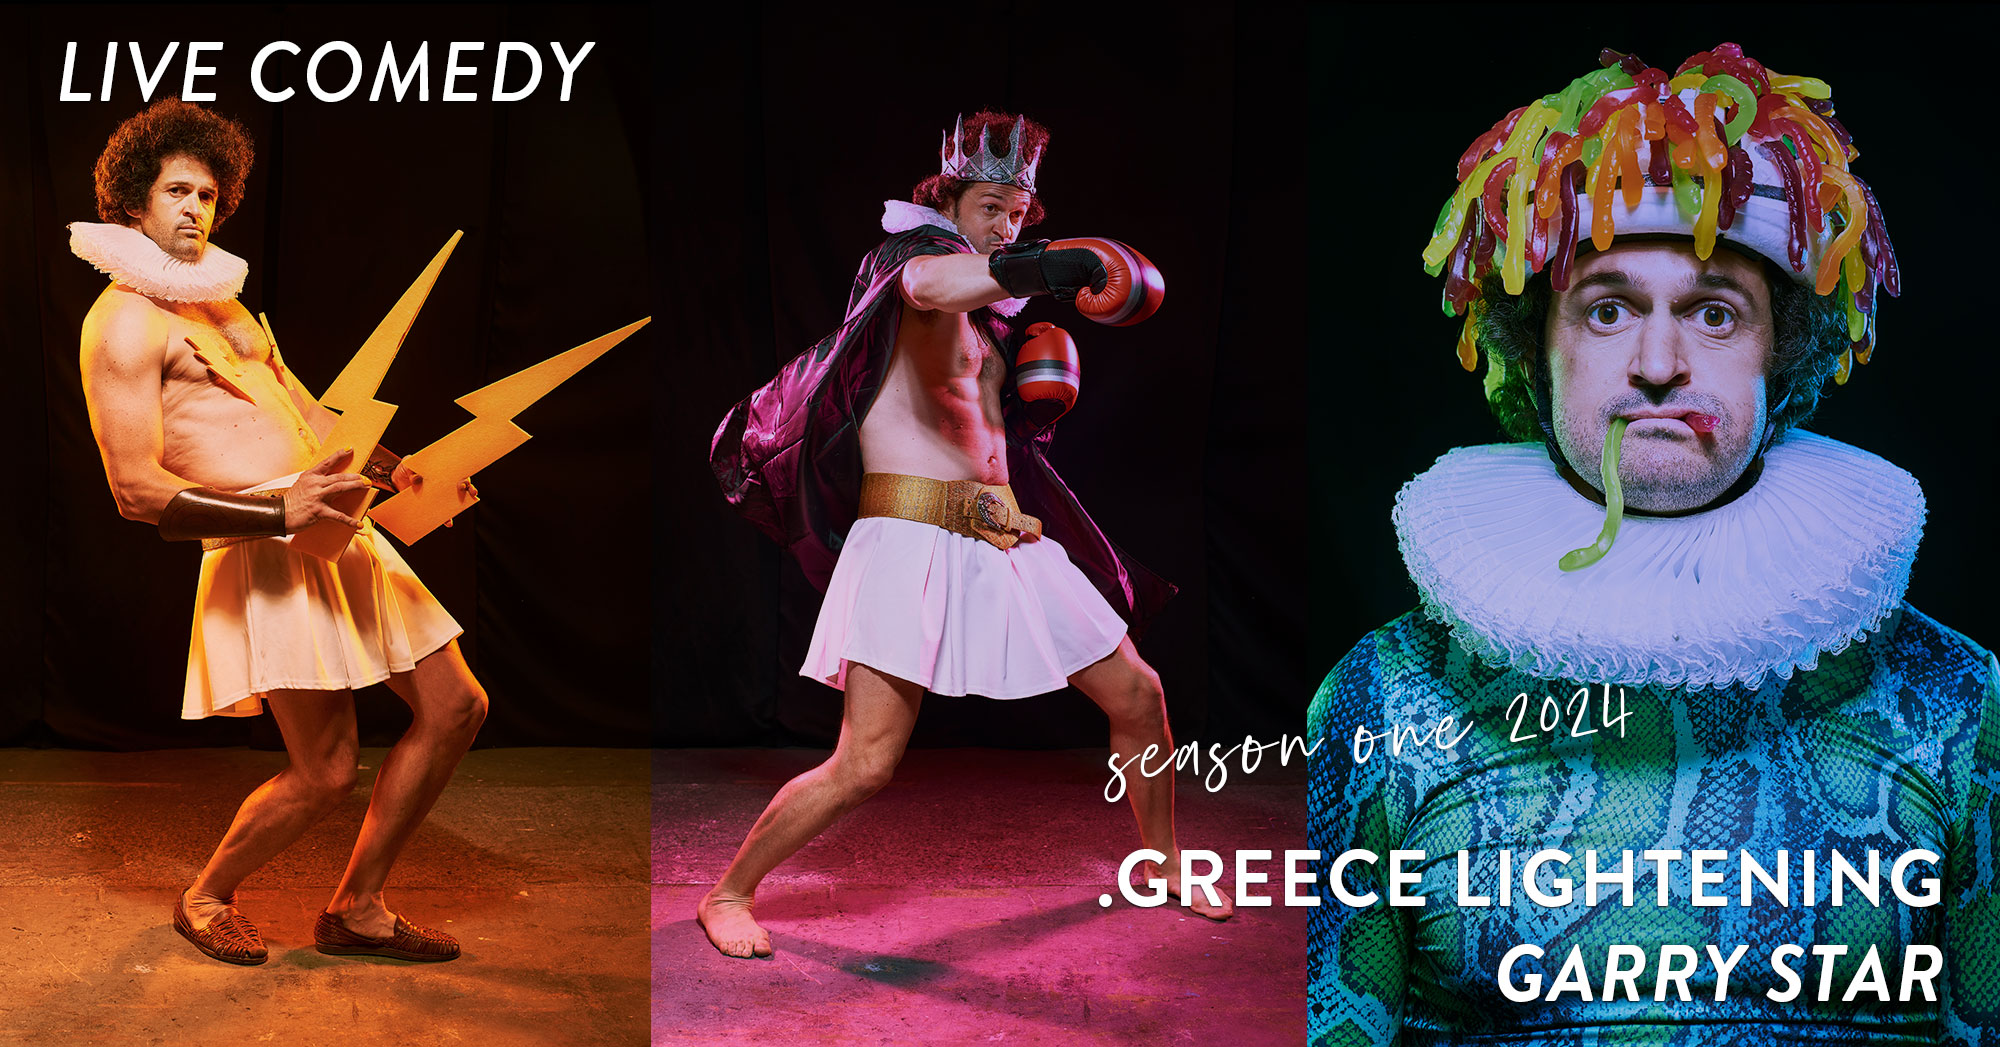 Greece Lightning ~ Garry Star. Zeus, Fools, and Drachmas: One Idiot's Mythical Quest for Prosperity. Thu 13 Jun 7.30pm | Lyre Room